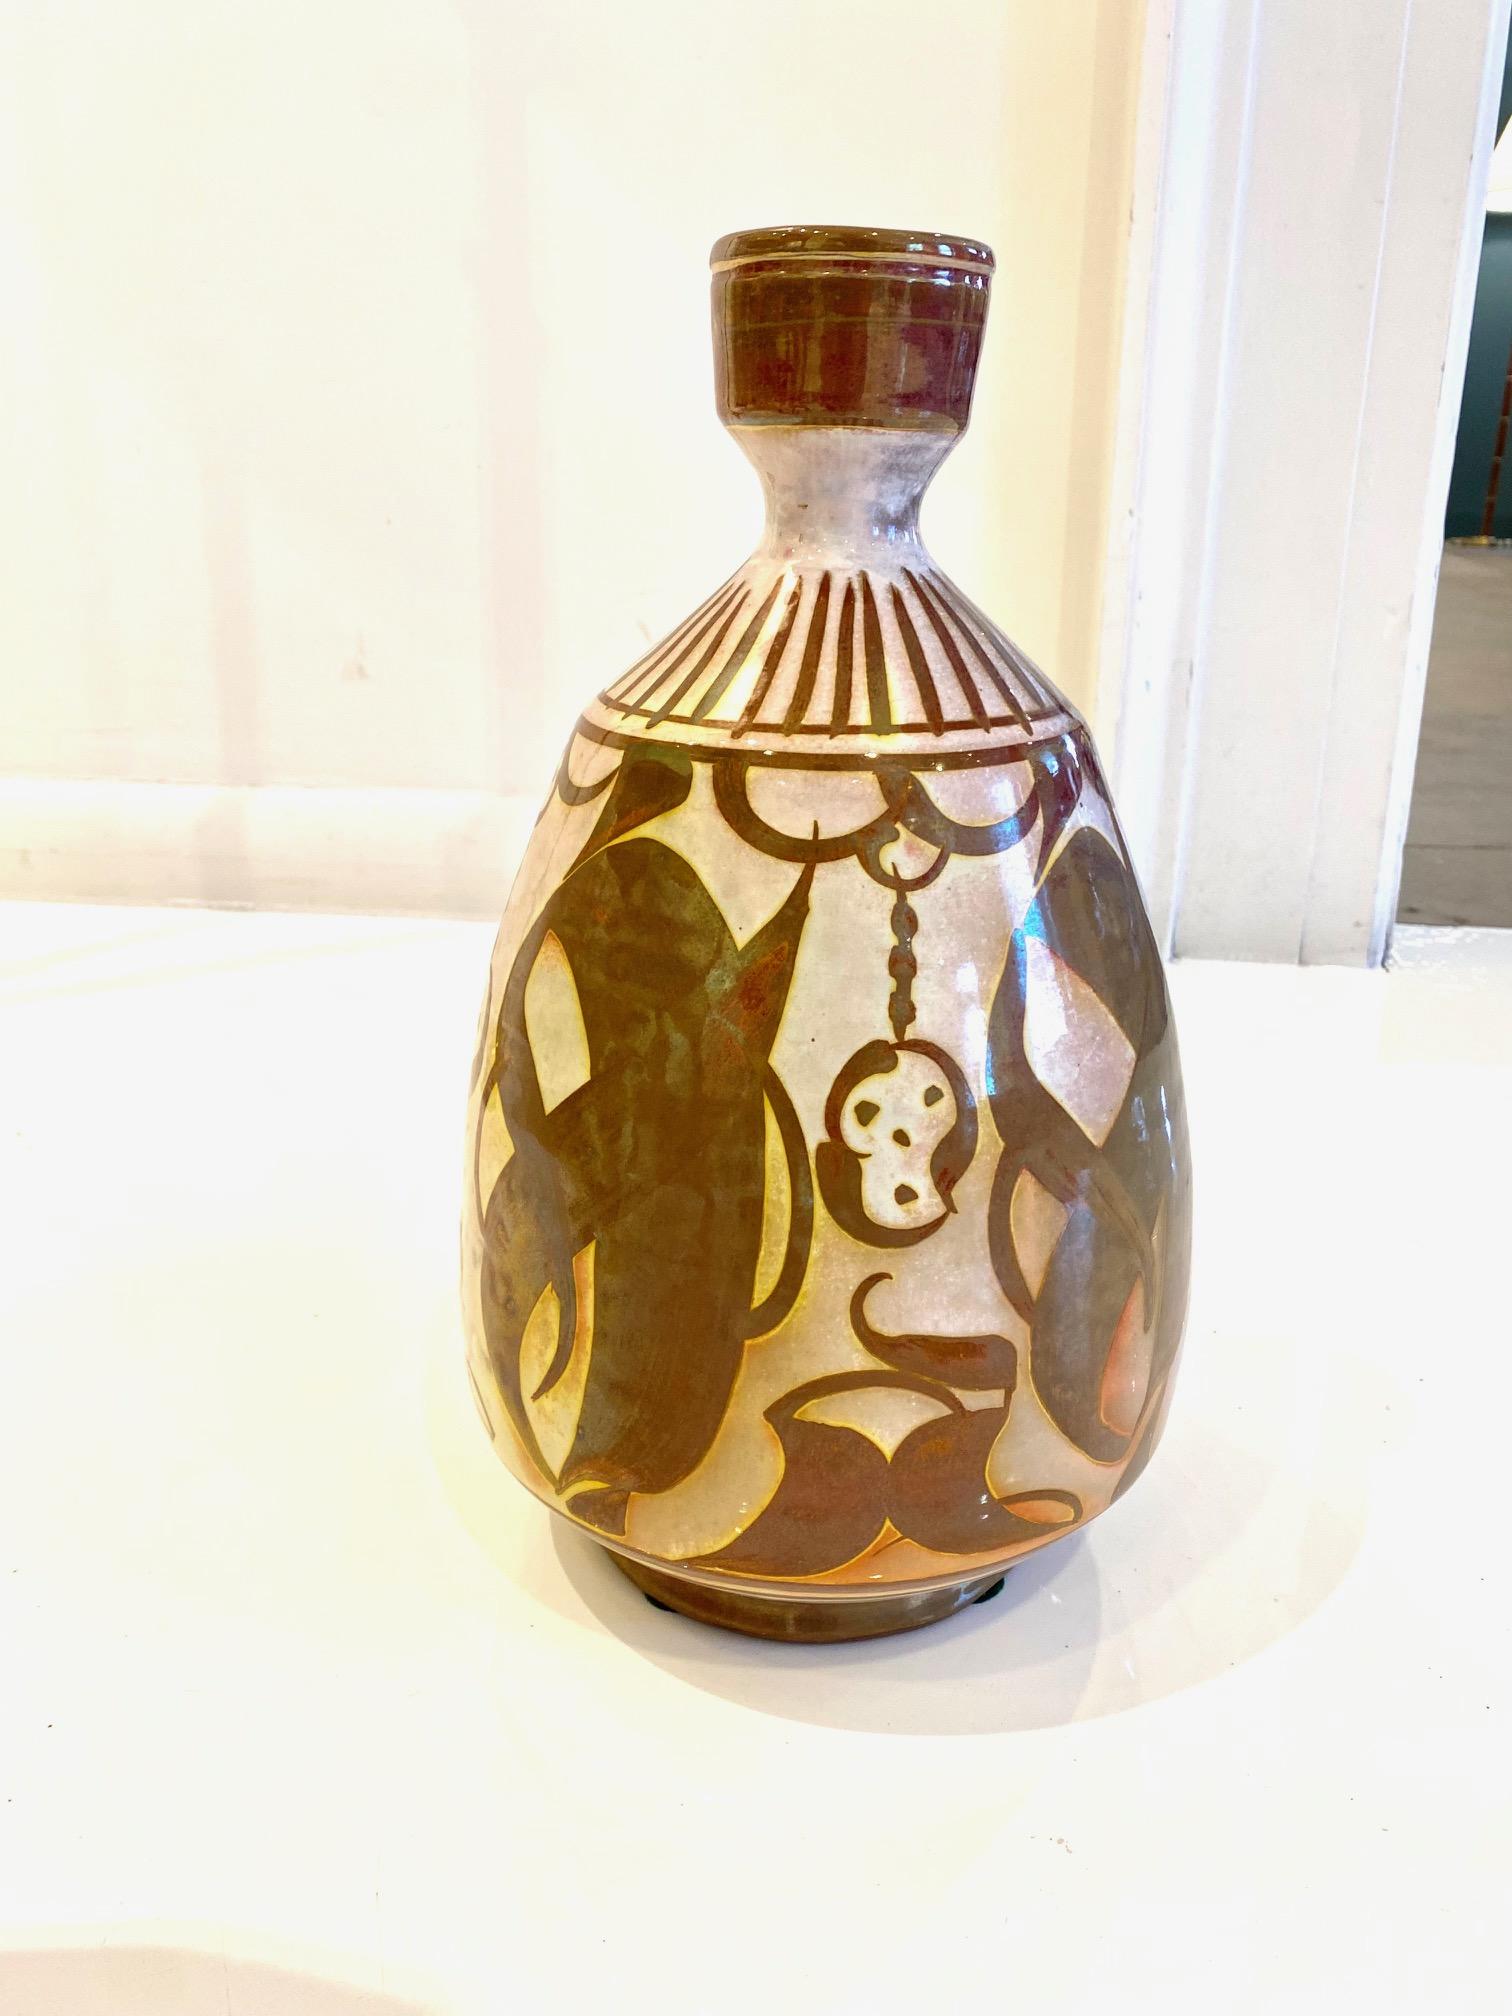 Maroon and White Ceramic Bottle by Alan Caiger Smith marked 82.AL, -2 and with three other script marks England: circa 1980. Alan Caiger-Smith is a ceramicist, painter, and published scholar, best known for his tin-glazed lusterware, hand-decorated